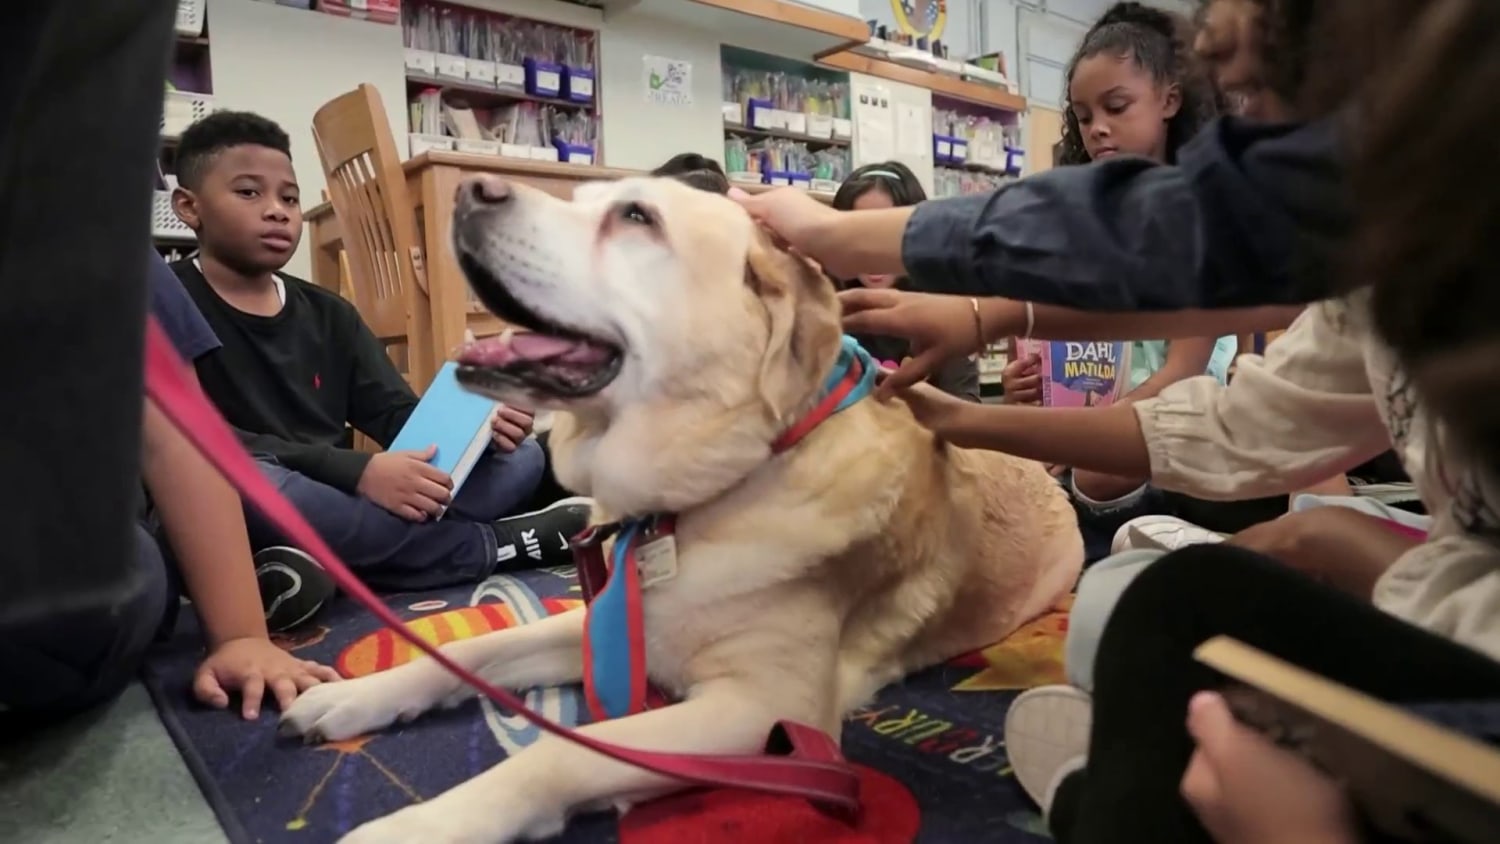 A very good girl: U of L Health celebrates therapy dog on National